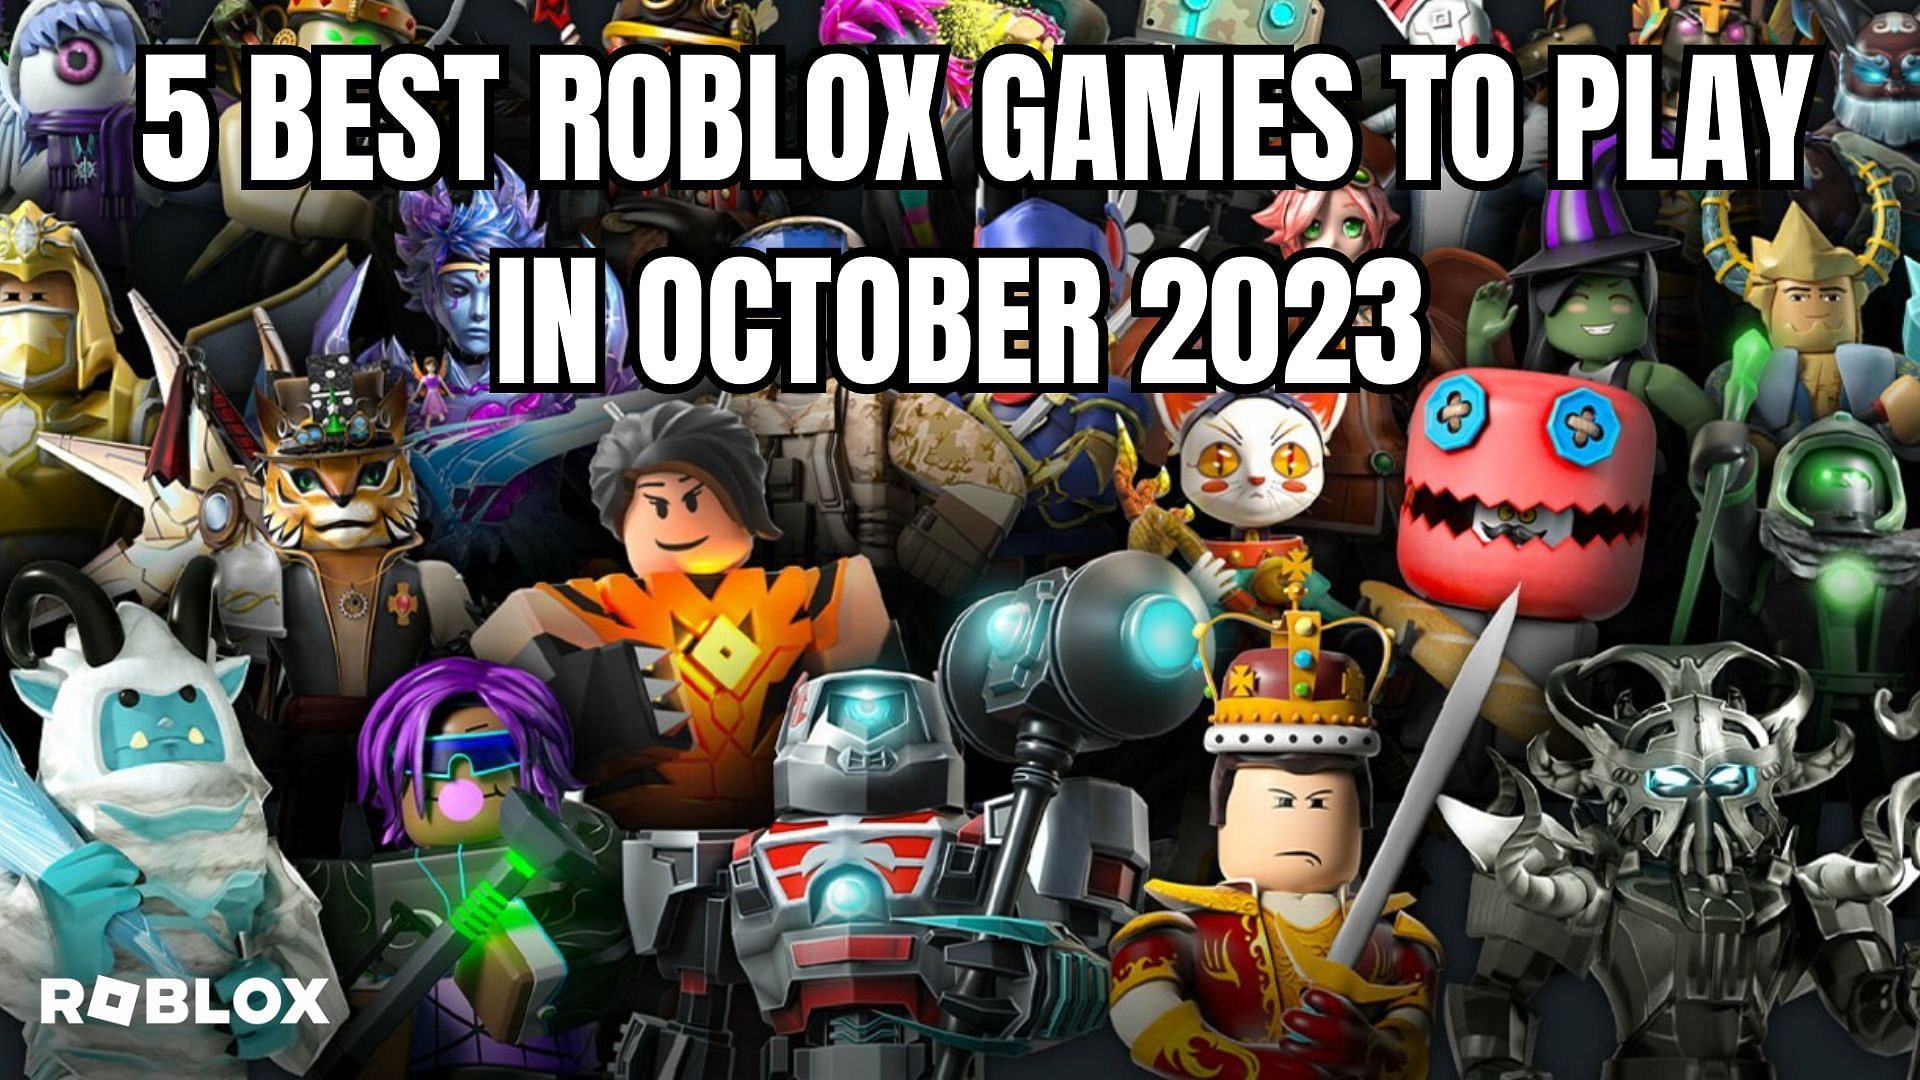 5 best Roblox games to play in October 2023